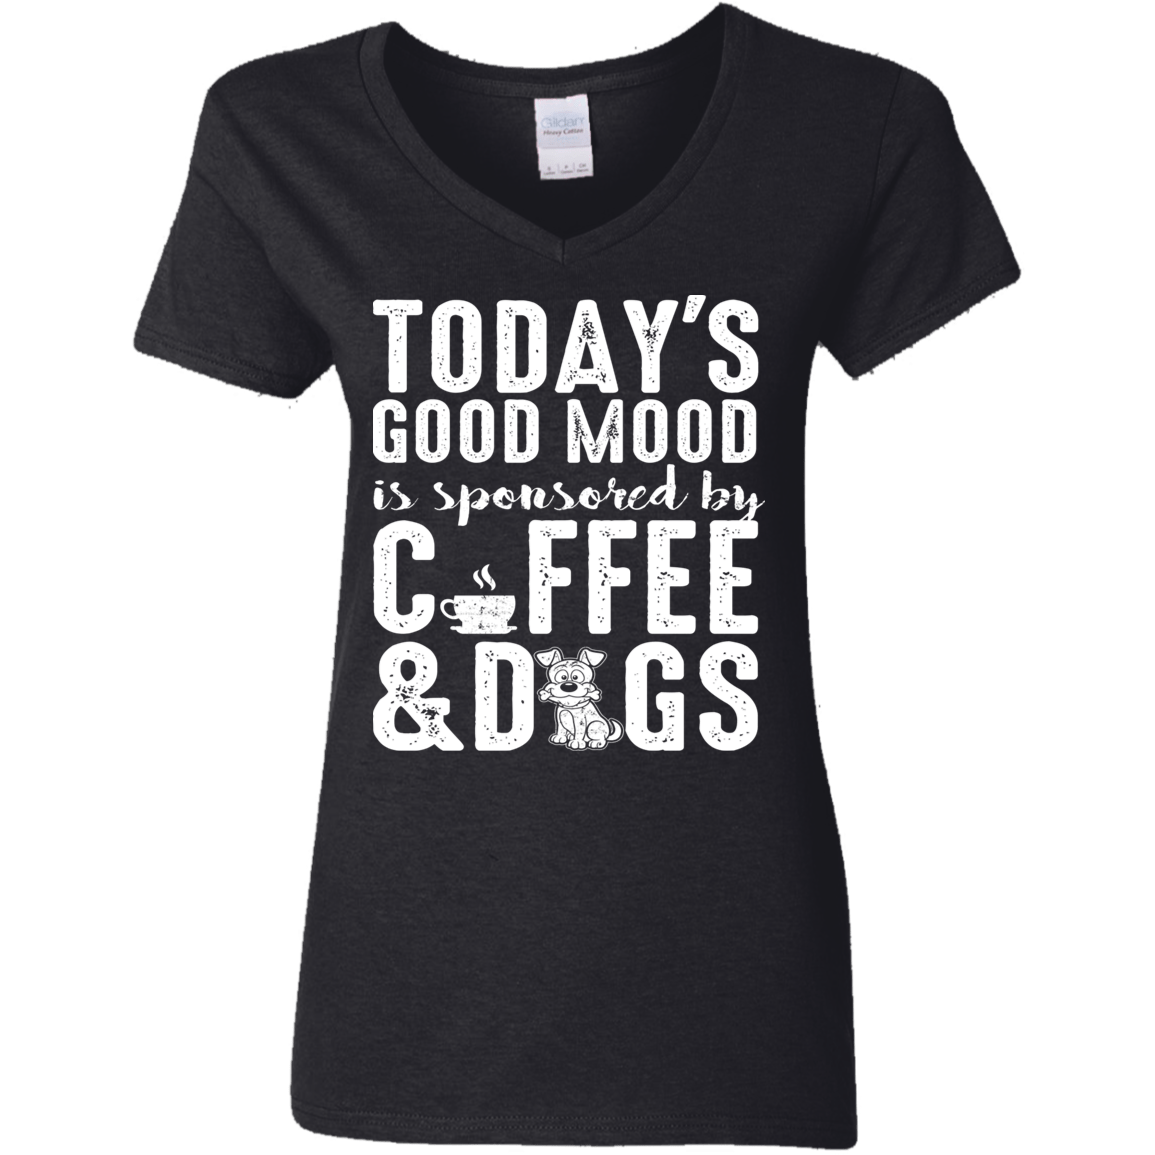 Today's Good Mood Coffee & Dogs - Ladies V Neck.